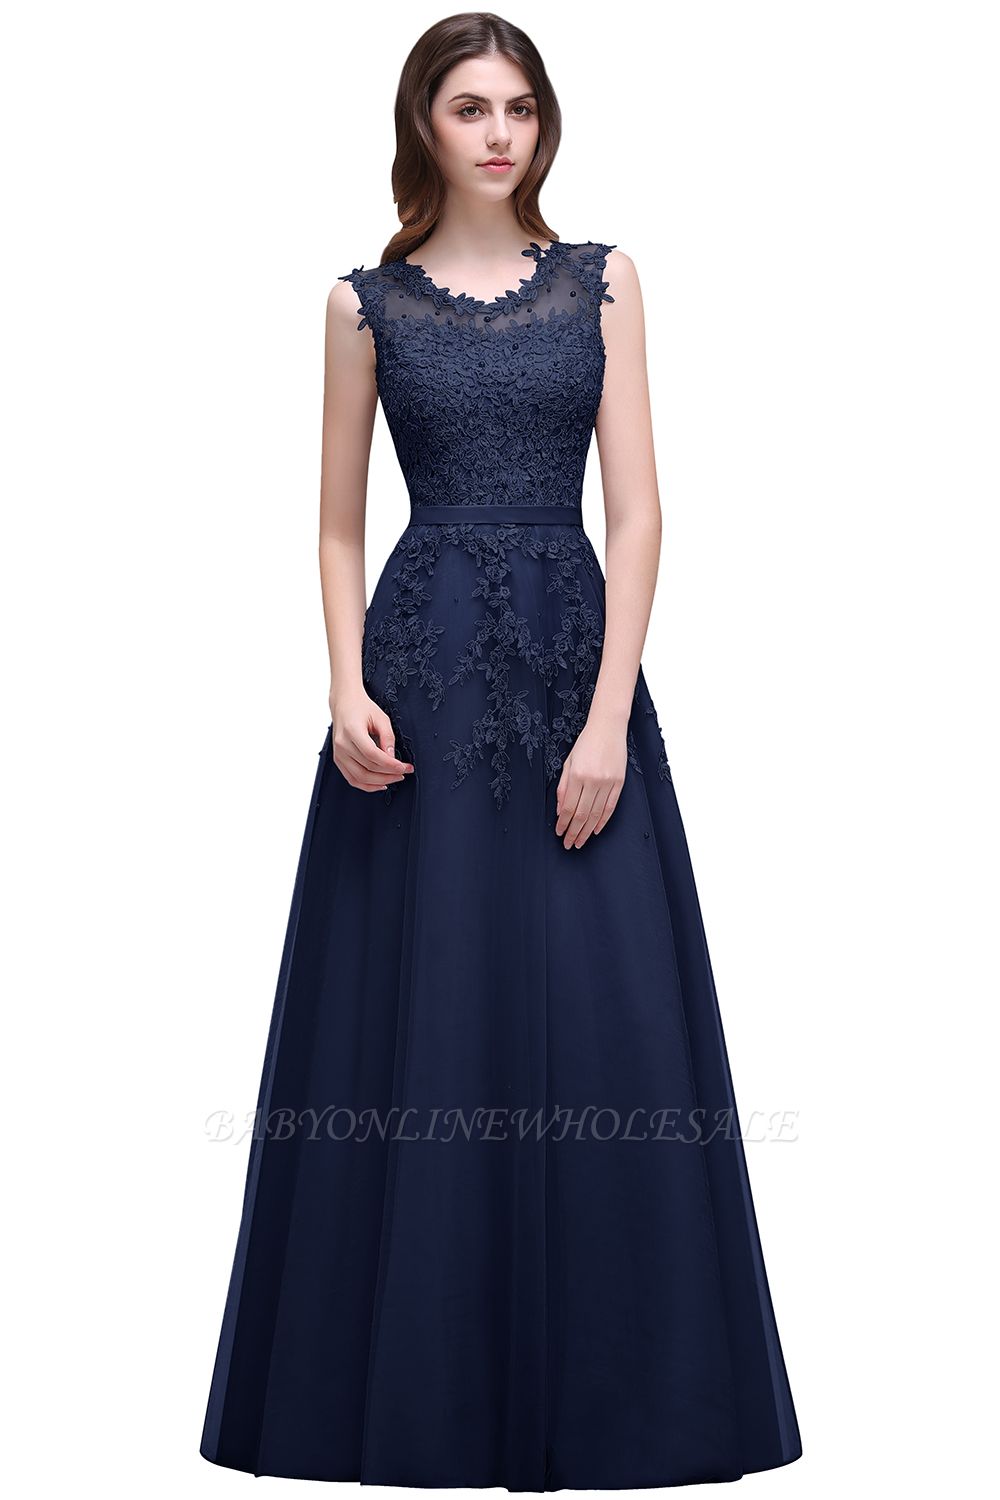 ADDILYN | A-line Floor-length Tulle Prom Dress with Appliques